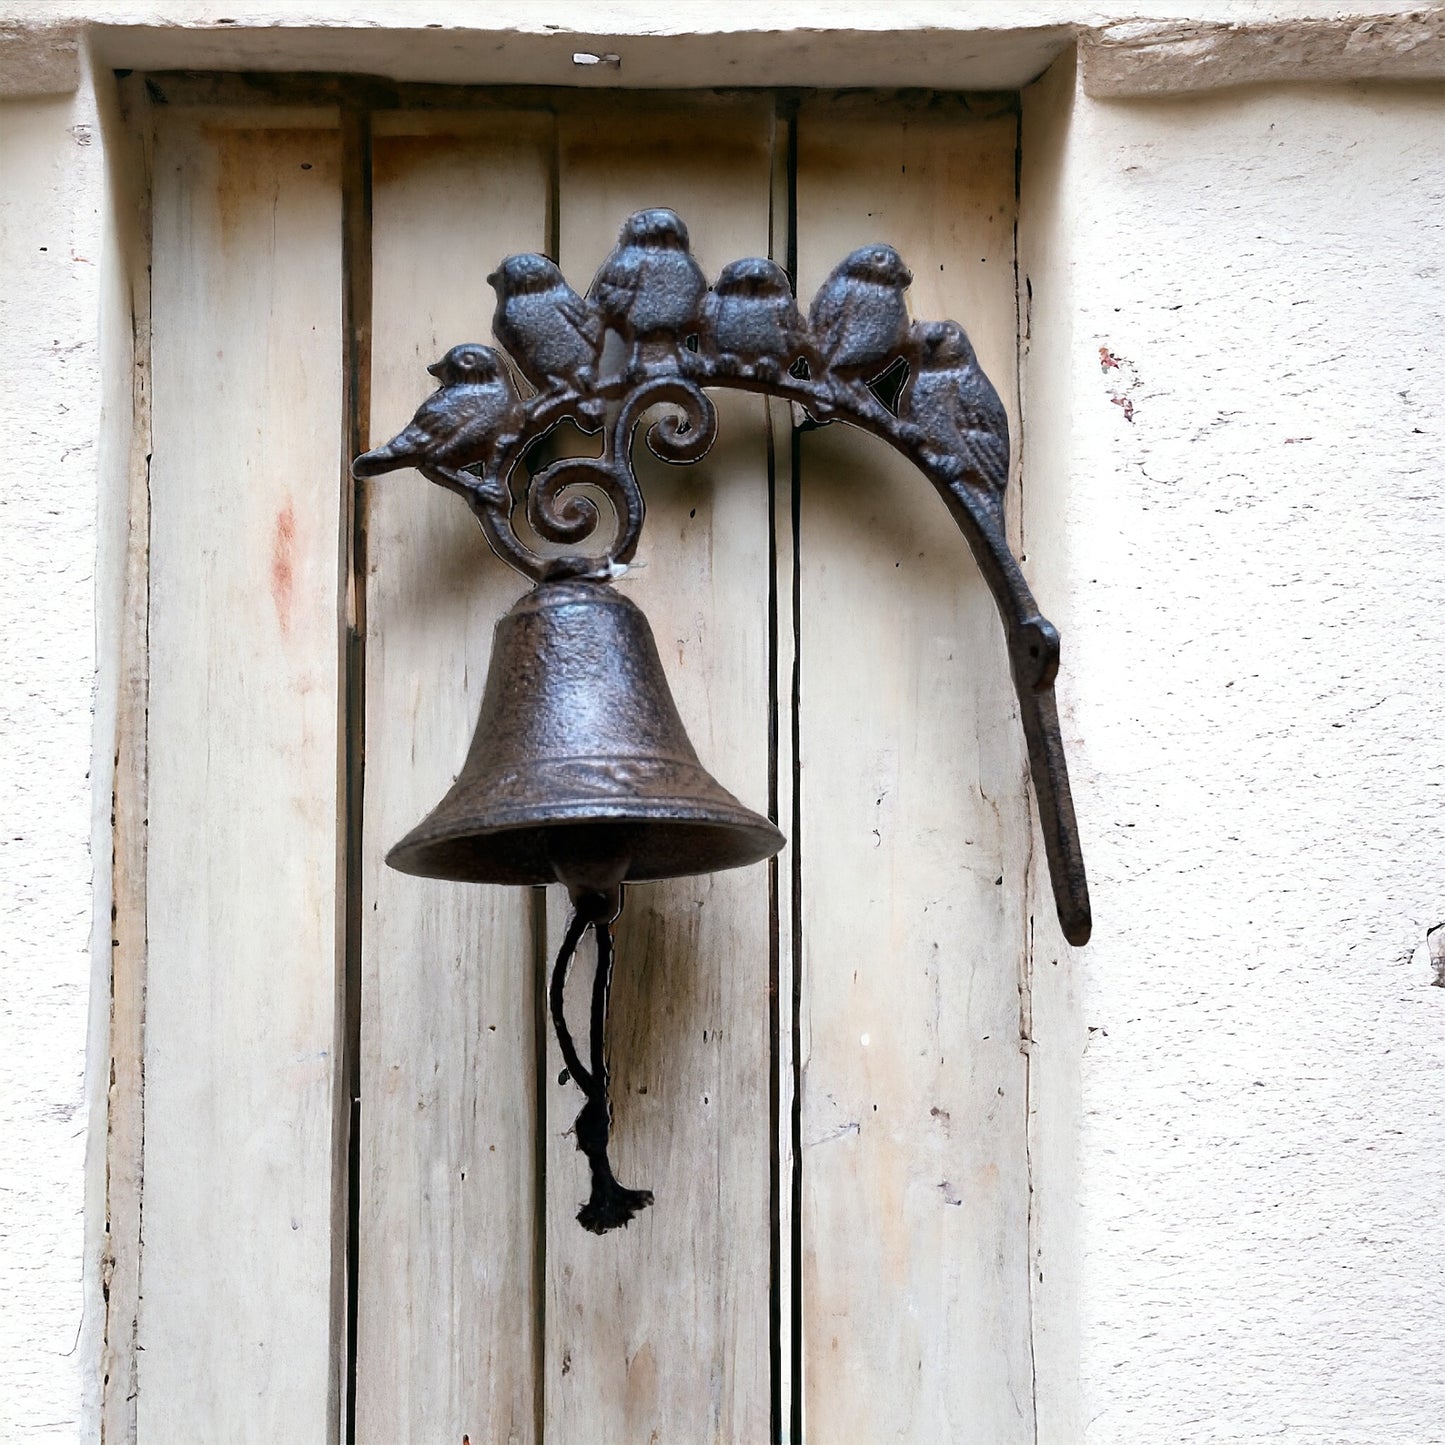 Door Bell Birds Perched Vintage - The Renmy Store Homewares & Gifts 